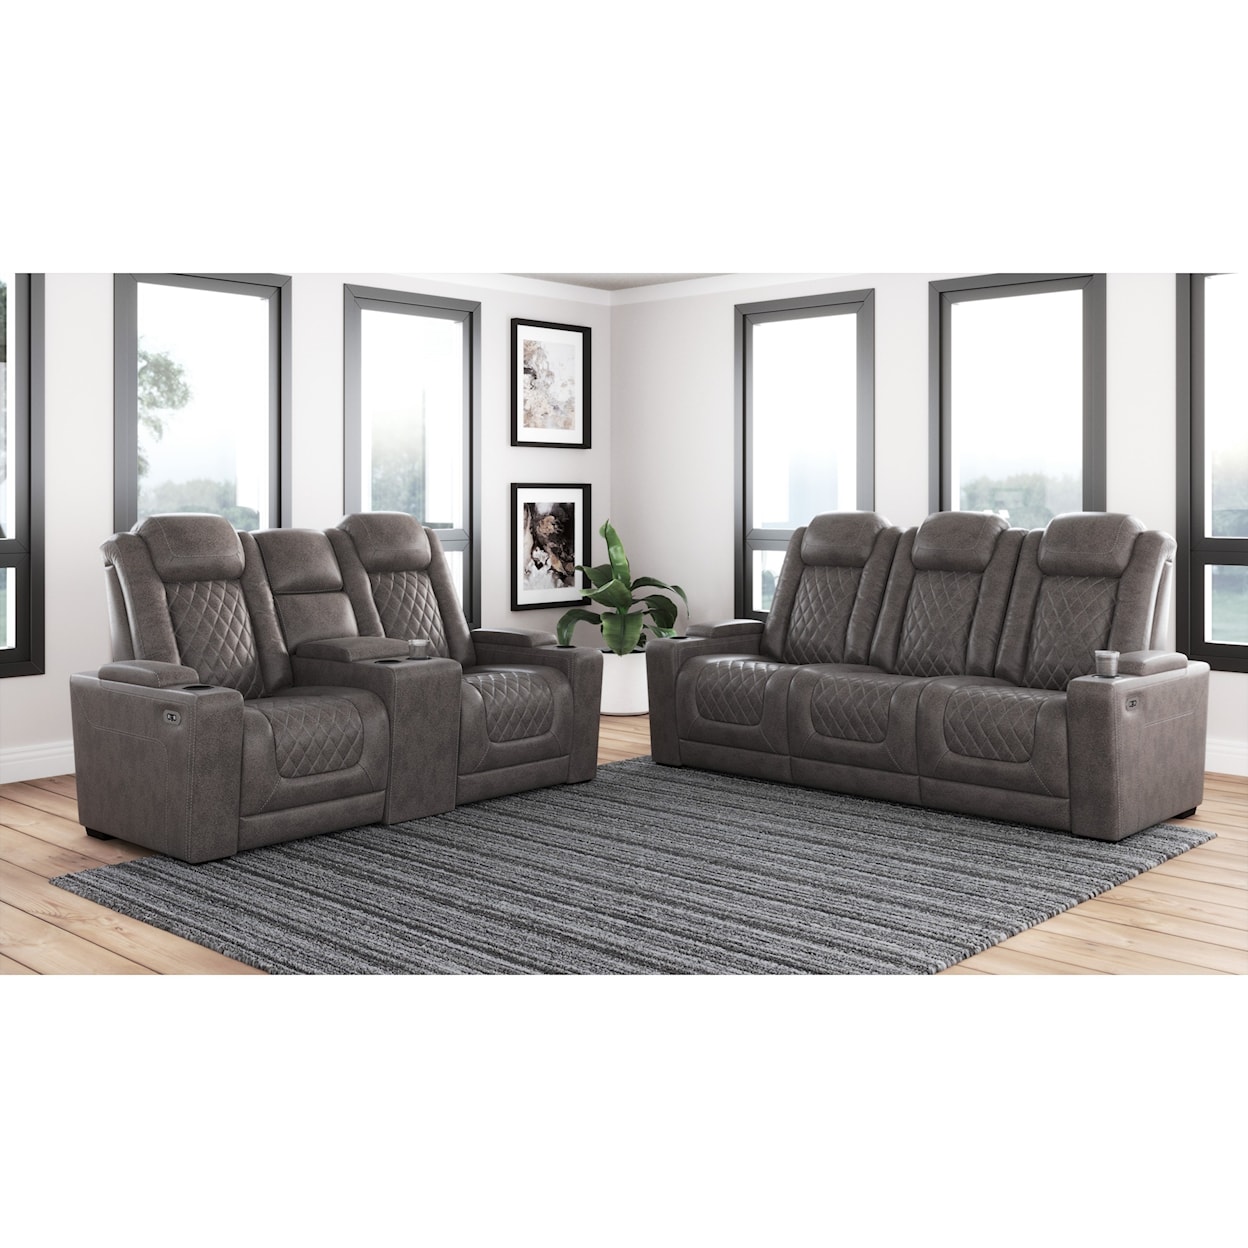 Signature Design Hyllmont Power Reclining Living Room Group